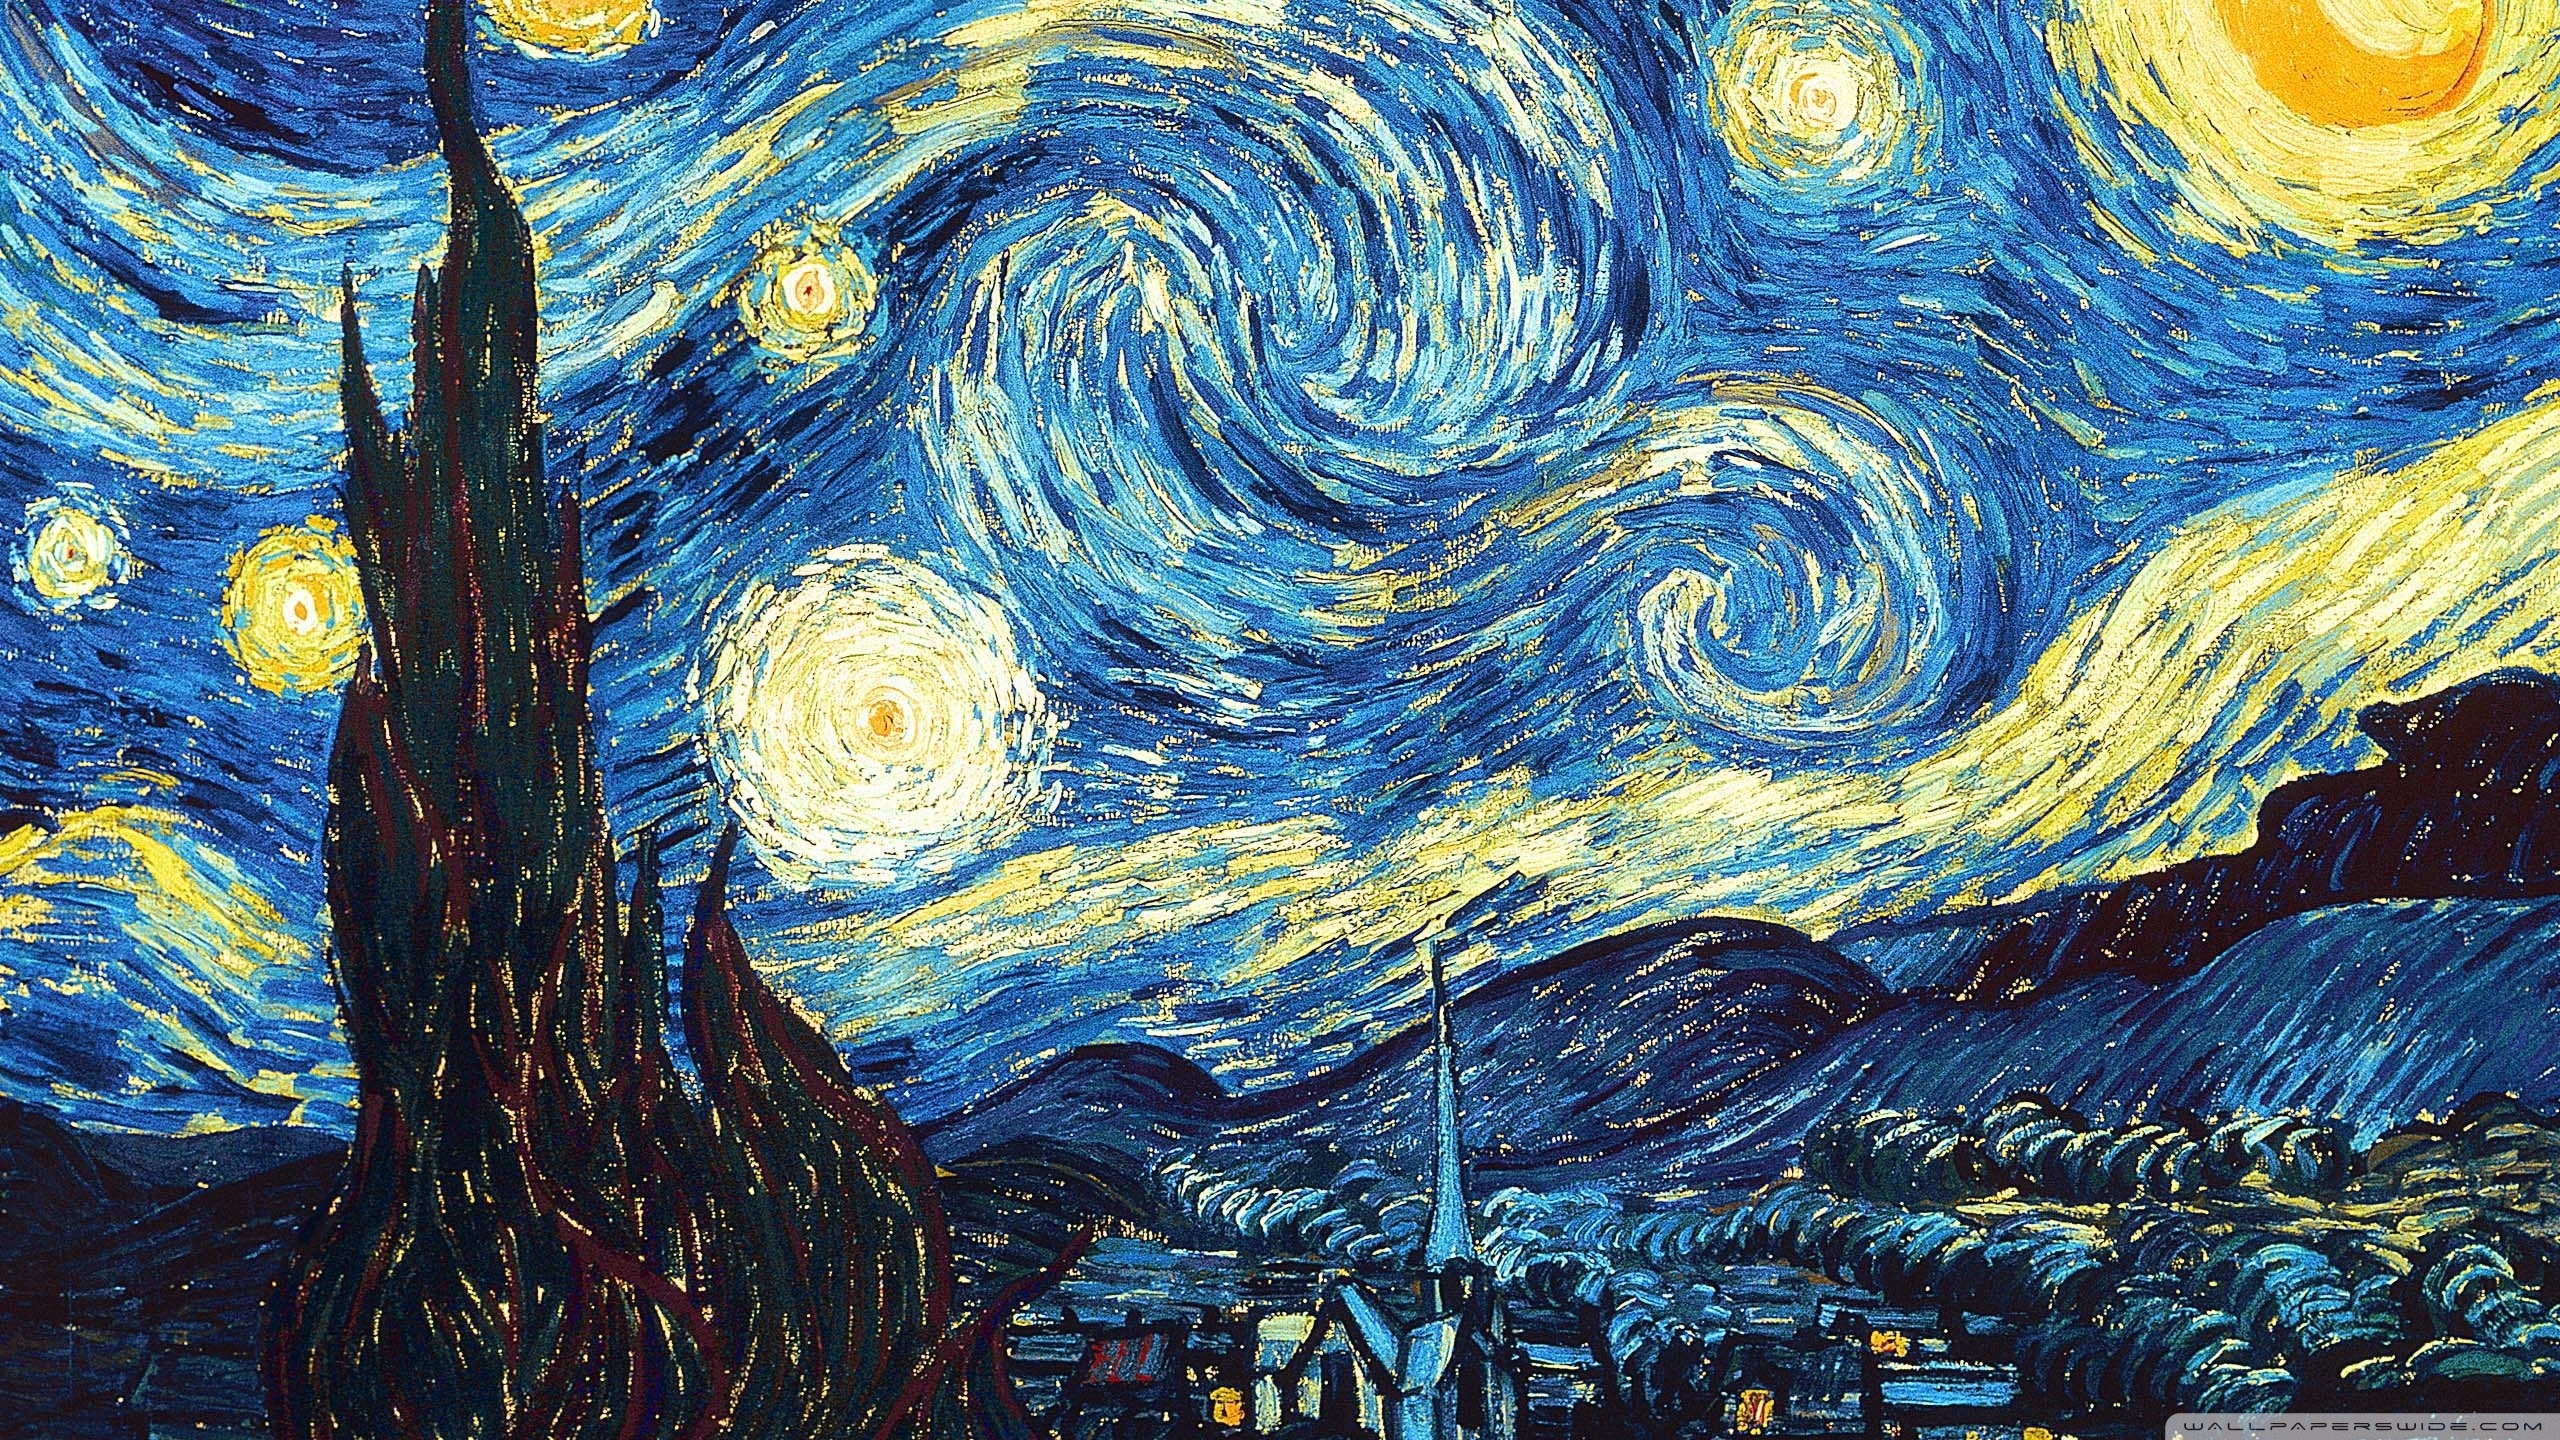 10 Latest Van Gogh Painting Wallpaper FULL HD 1080p For PC Background